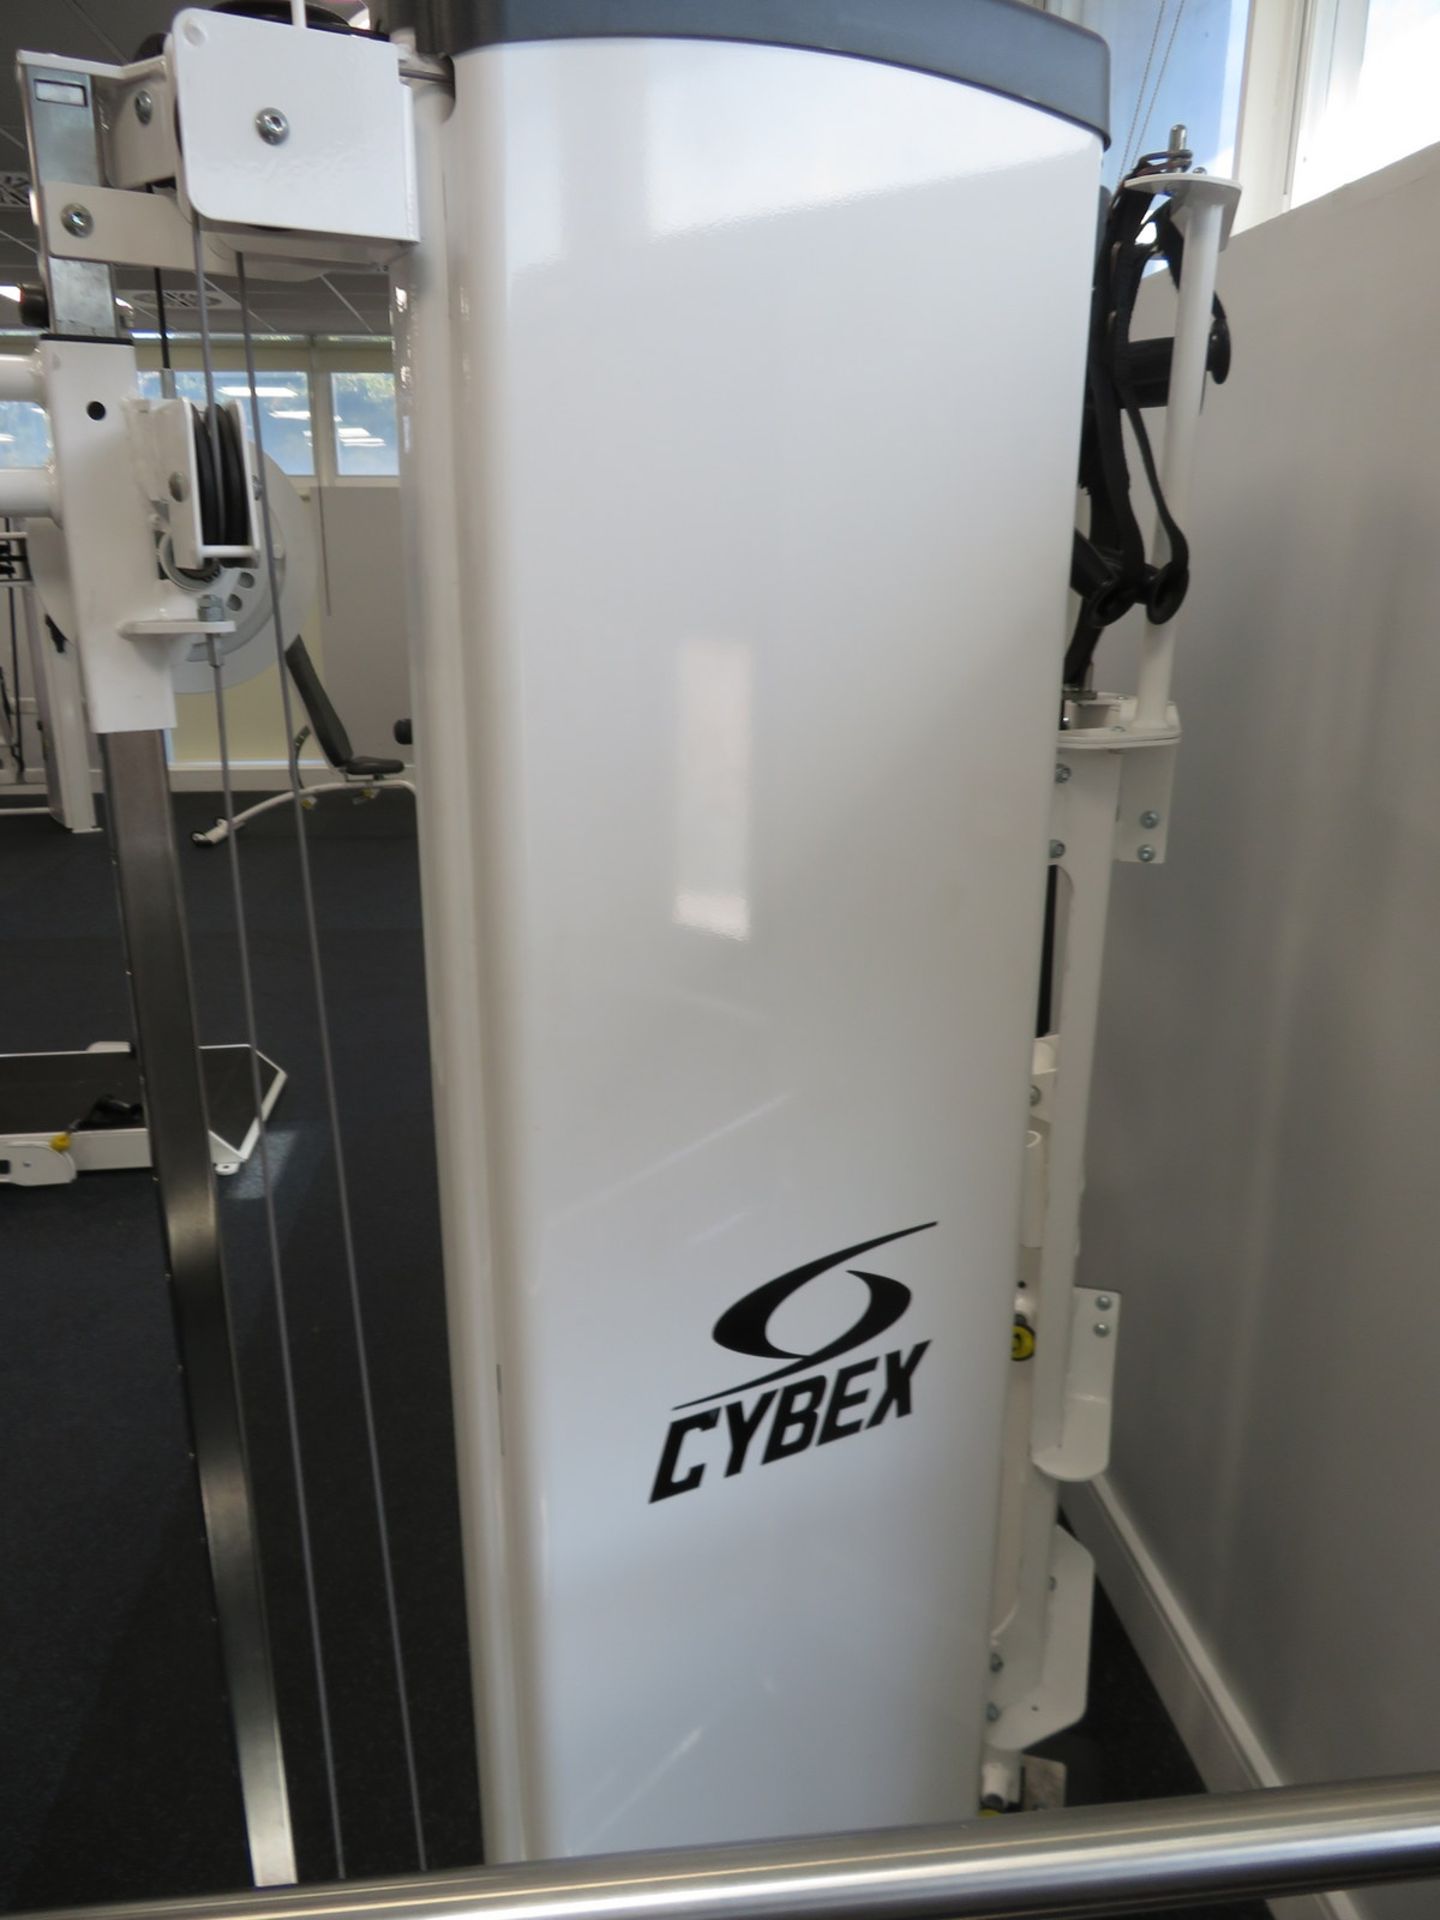 Cybex Bravo (Cable) Model: 8810. 38.6kg Weight Stack. Complete With Attachments. - Image 14 of 16